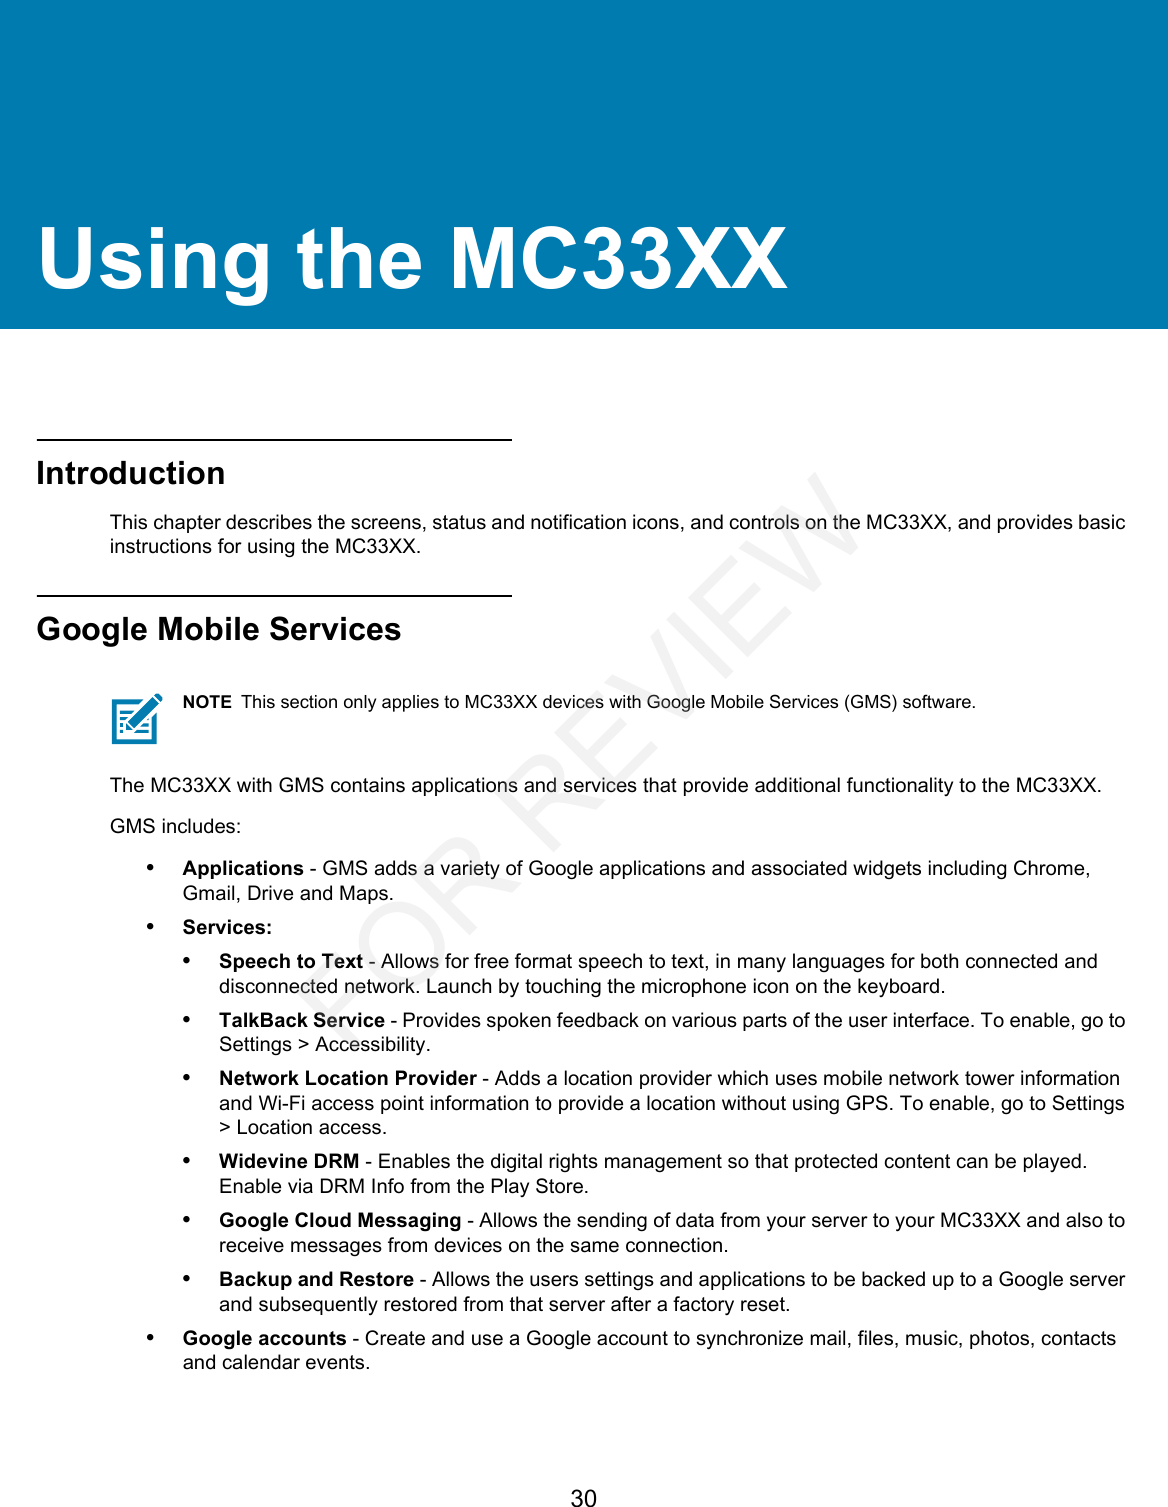 30Using the MC33XXIntroductionThis chapter describes the screens, status and notification icons, and controls on the MC33XX, and provides basic instructions for using the MC33XX.Google Mobile ServicesThe MC33XX with GMS contains applications and services that provide additional functionality to the MC33XX.GMS includes:•Applications - GMS adds a variety of Google applications and associated widgets including Chrome, Gmail, Drive and Maps.•Services:•Speech to Text - Allows for free format speech to text, in many languages for both connected and disconnected network. Launch by touching the microphone icon on the keyboard.•TalkBack Service - Provides spoken feedback on various parts of the user interface. To enable, go to Settings &gt; Accessibility.•Network Location Provider - Adds a location provider which uses mobile network tower information and Wi-Fi access point information to provide a location without using GPS. To enable, go to Settings &gt; Location access.•Widevine DRM - Enables the digital rights management so that protected content can be played. Enable via DRM Info from the Play Store.•Google Cloud Messaging - Allows the sending of data from your server to your MC33XX and also to receive messages from devices on the same connection.•Backup and Restore - Allows the users settings and applications to be backed up to a Google server and subsequently restored from that server after a factory reset.•Google accounts - Create and use a Google account to synchronize mail, files, music, photos, contacts and calendar events.NOTE This section only applies to MC33XX devices with Google Mobile Services (GMS) software.FOR REVIEW